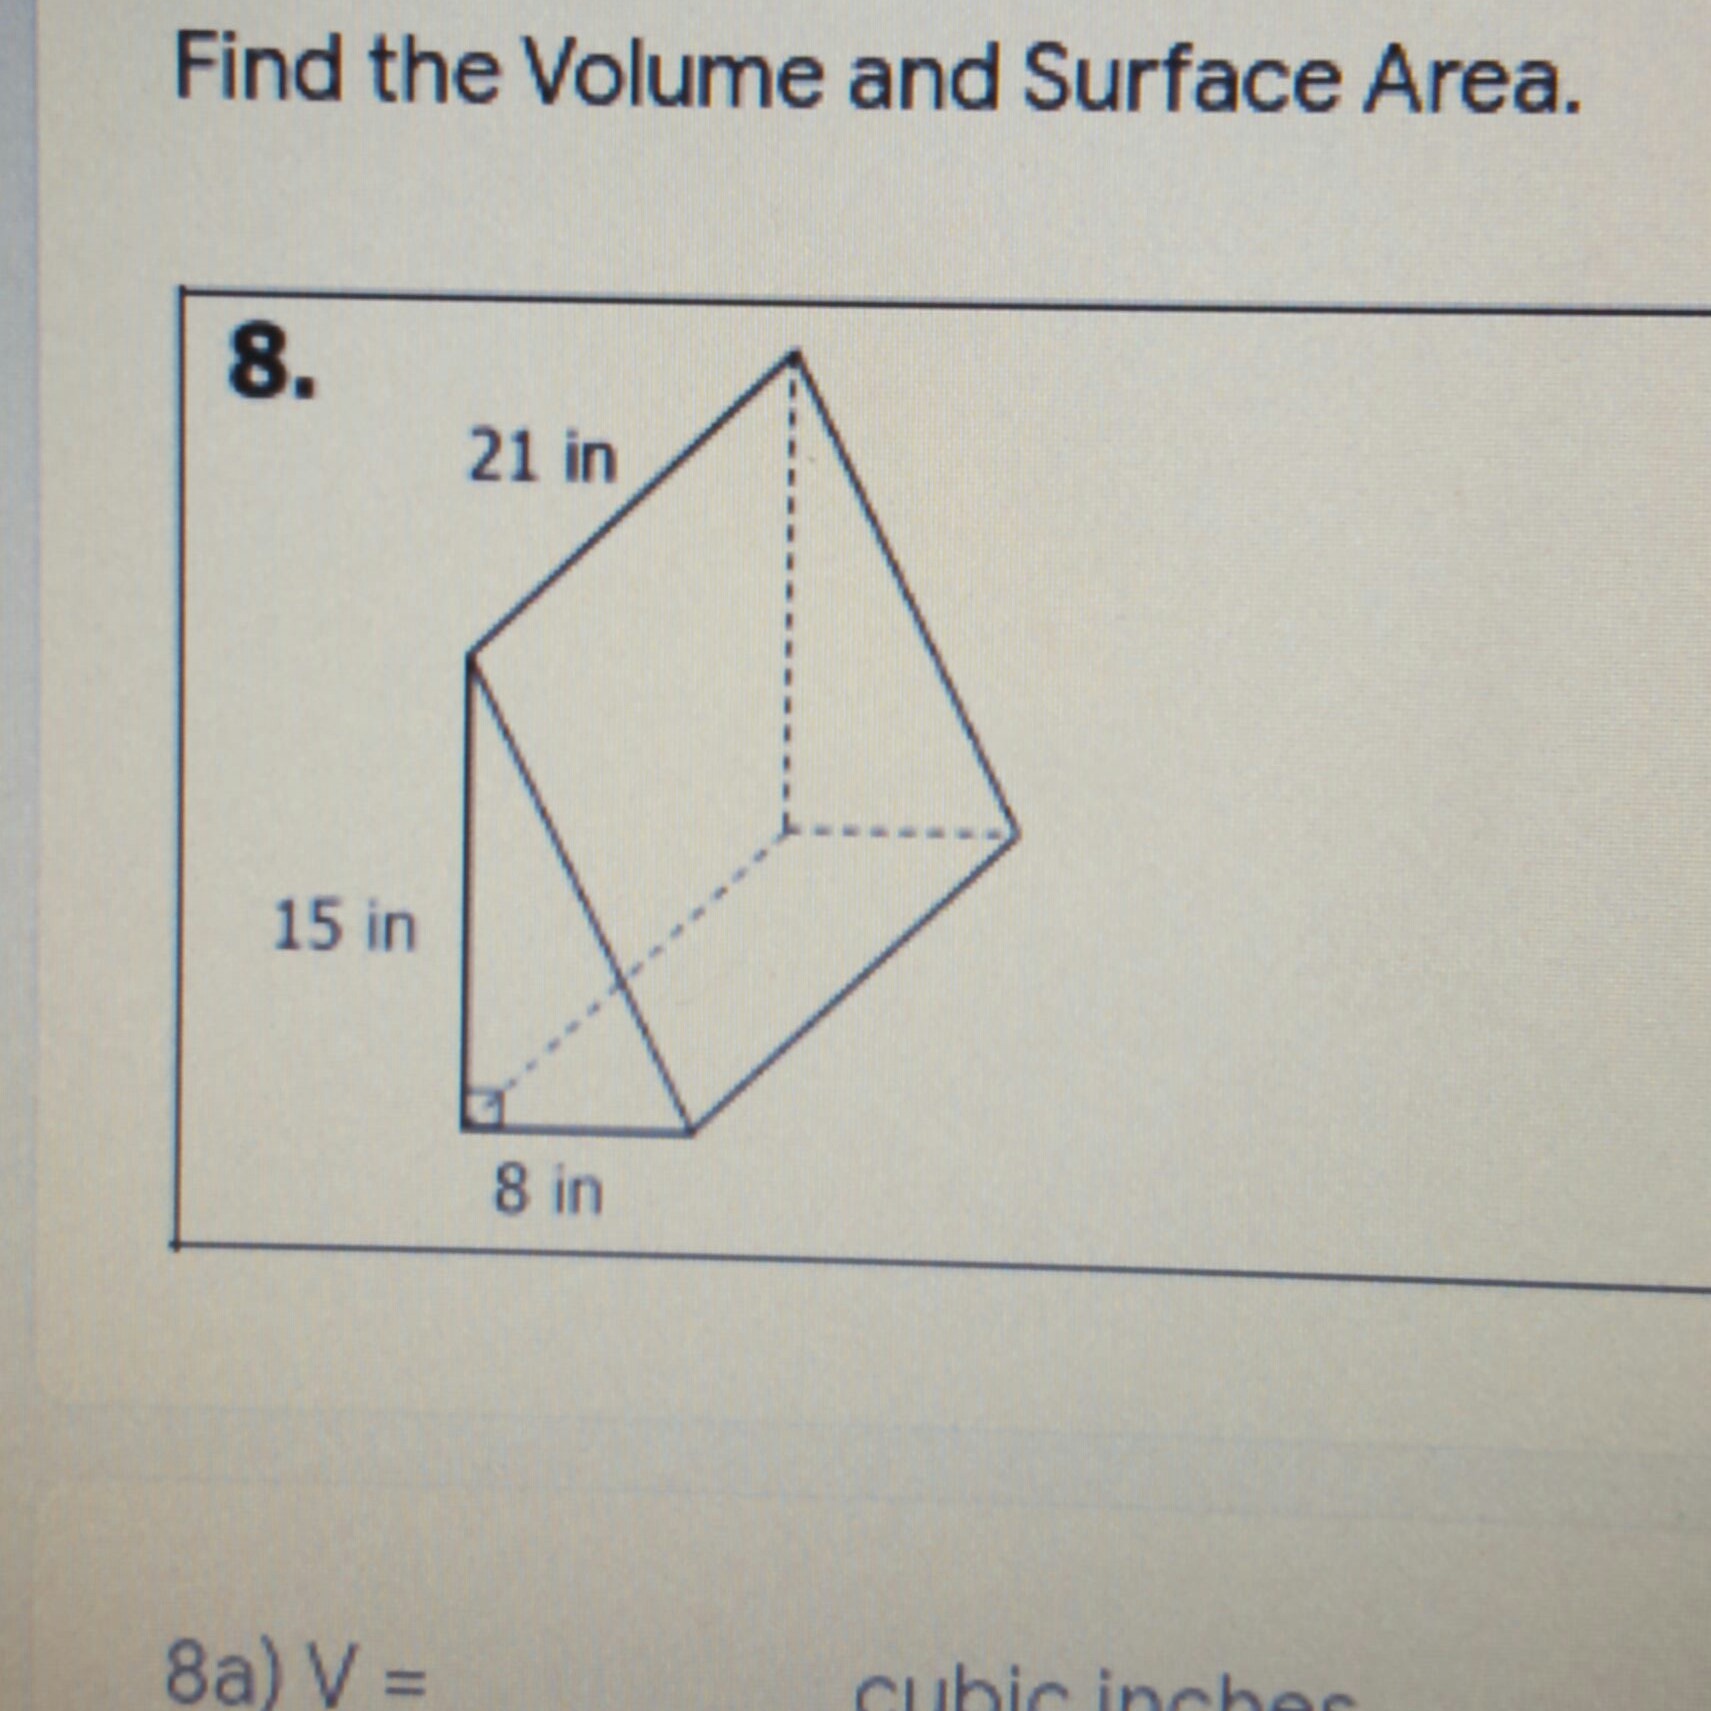 Find the Volume and Surface Area.